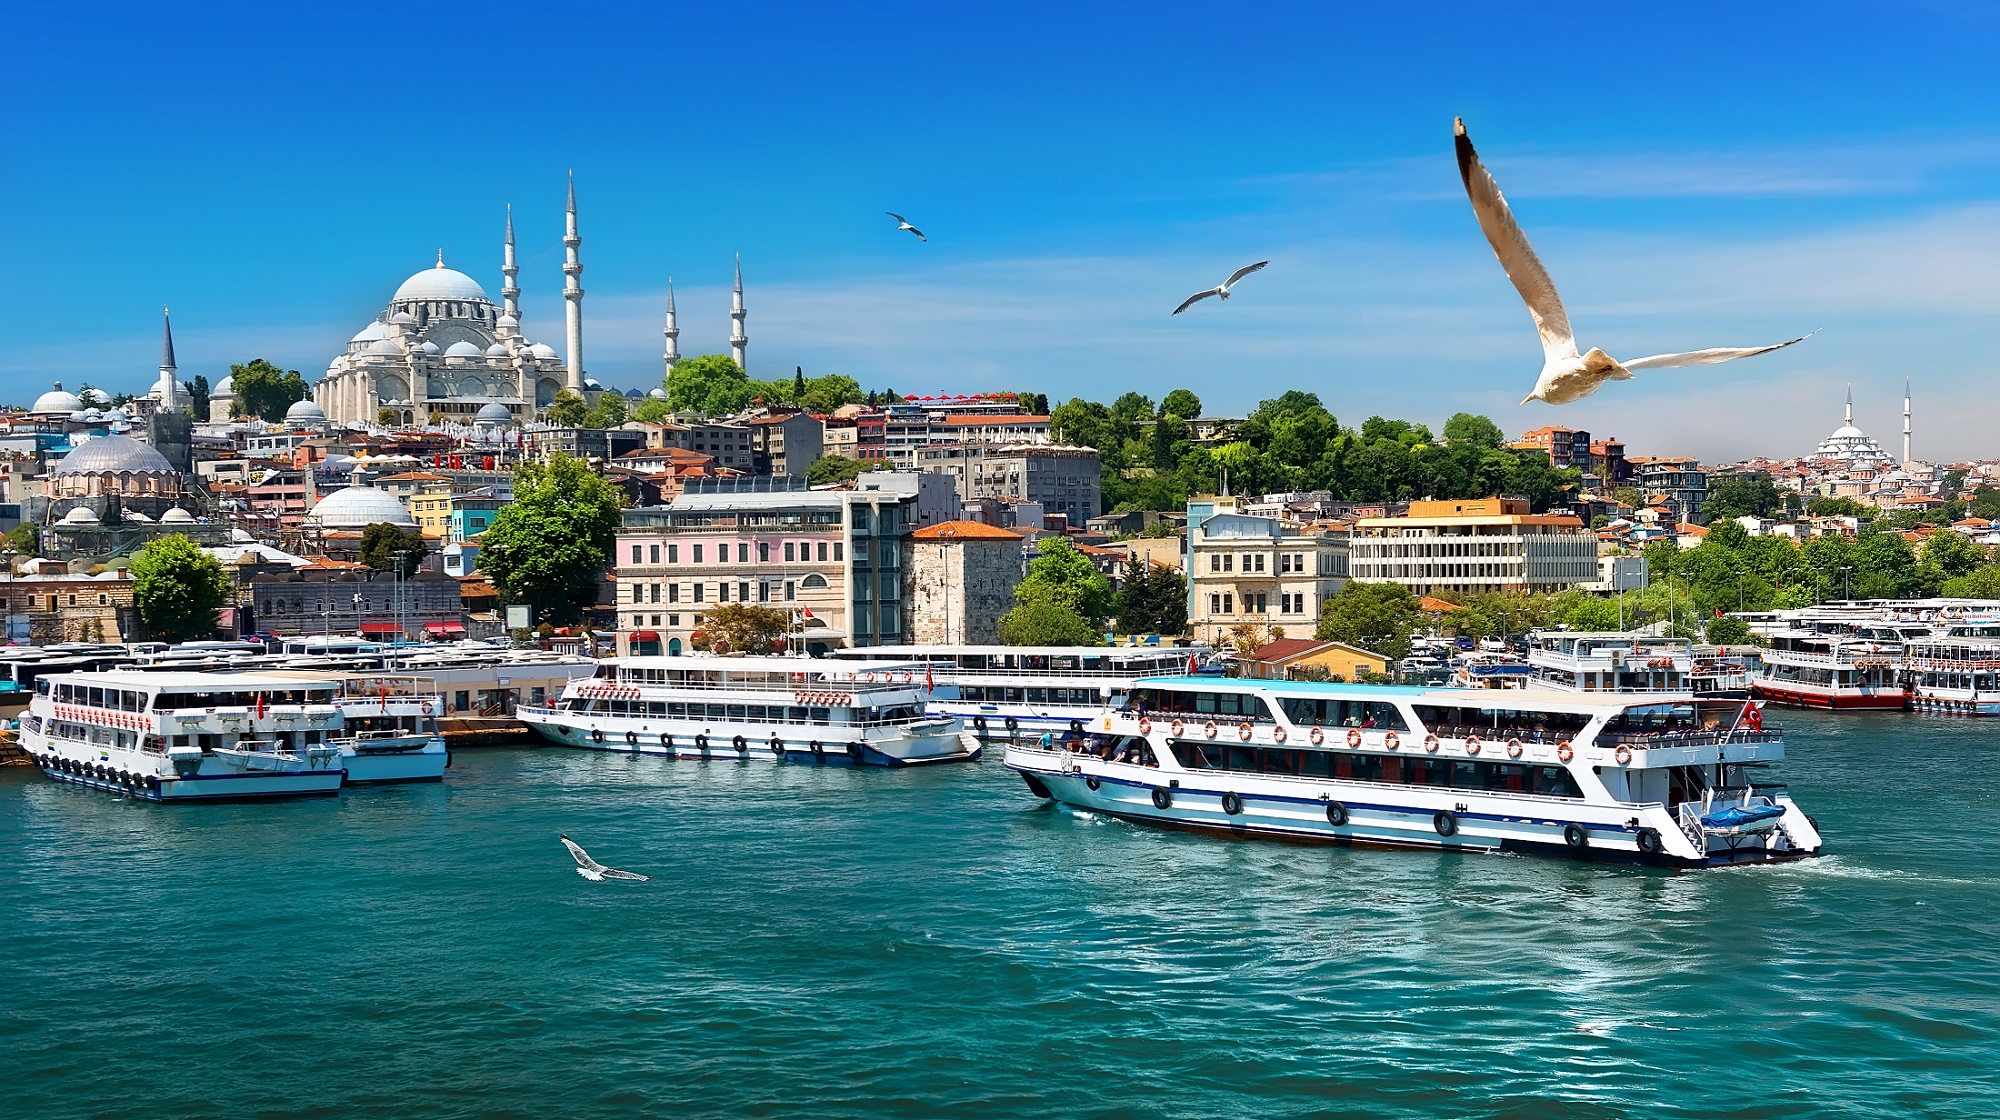 Easyjet Launches Flights for the First Time to Istanbul